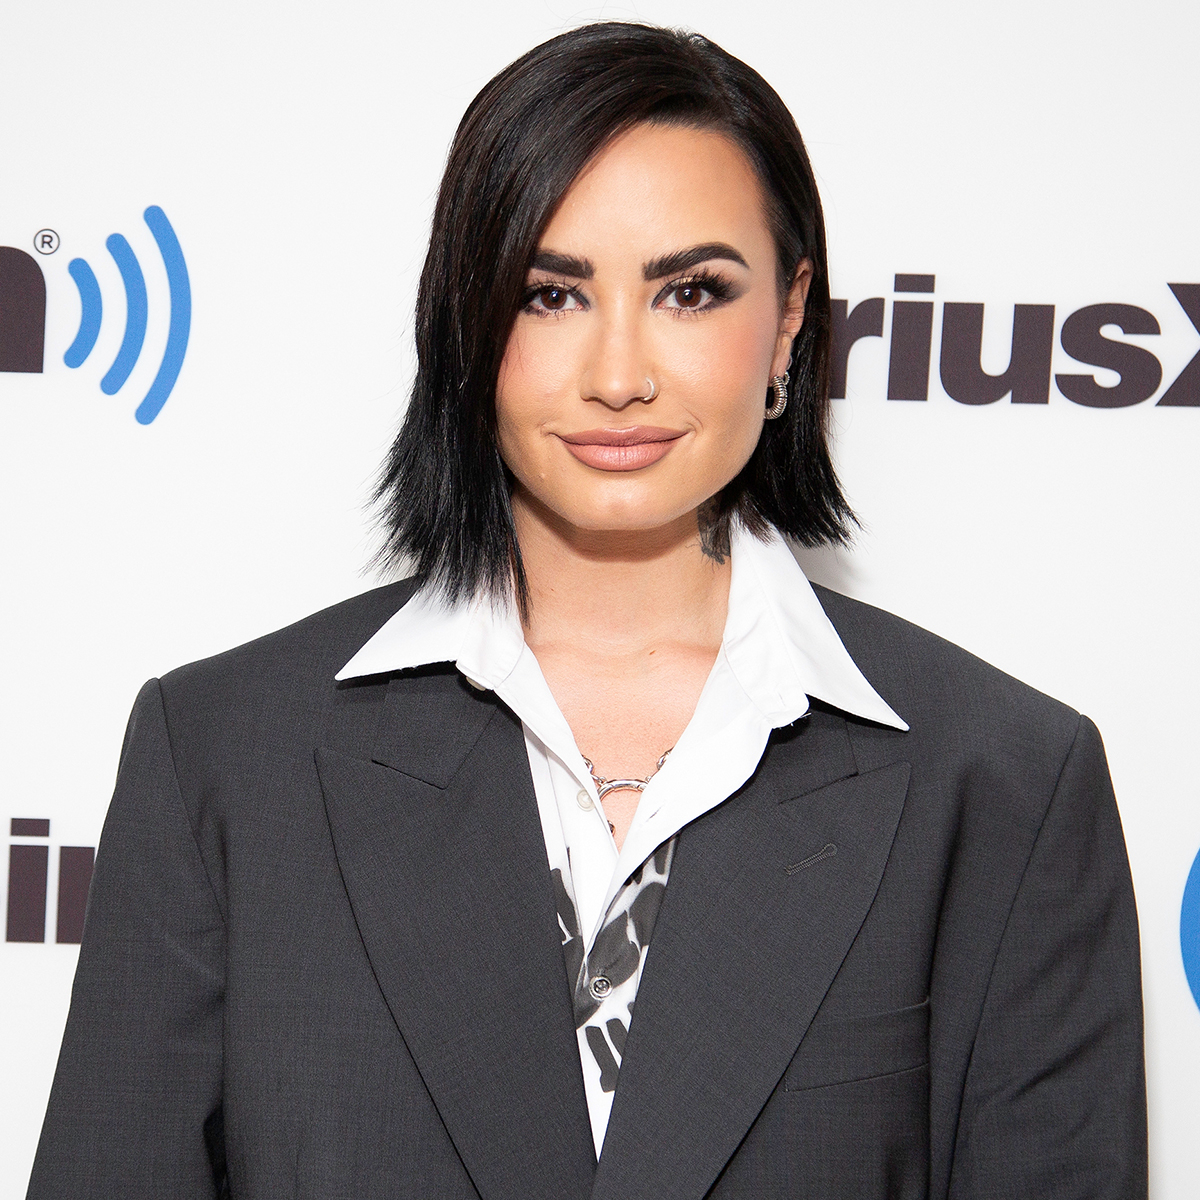 Demi Lovato Has Vision and Hearing Impairment After 2018 Overdose